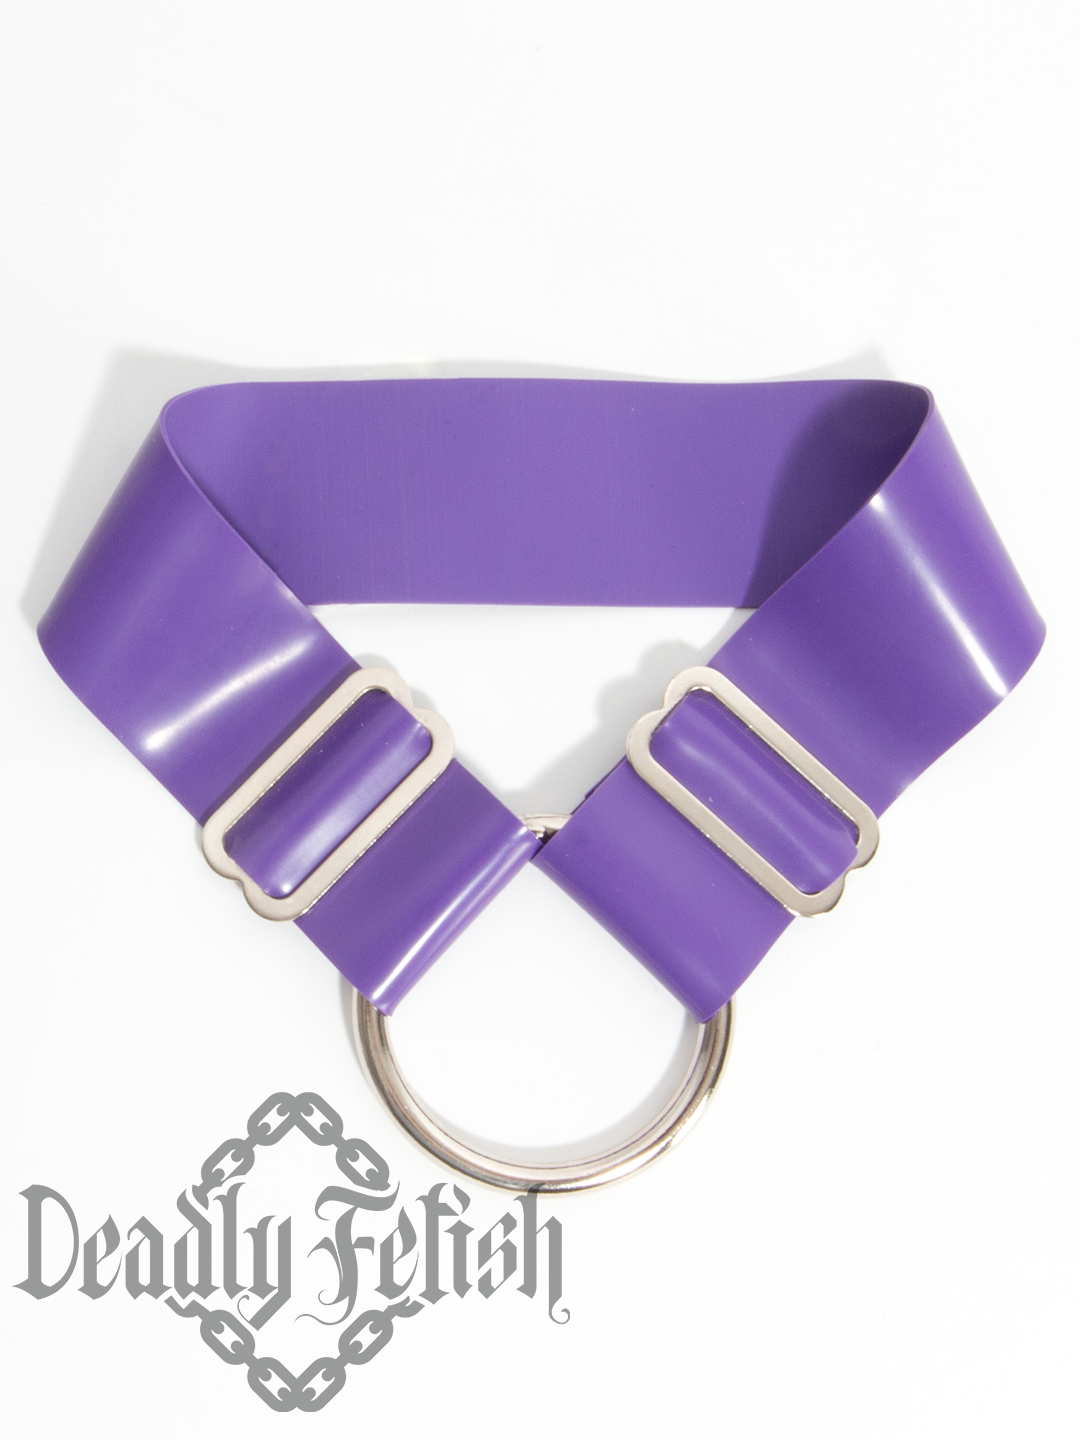 Deadly Fetish Latex: Wide Multi-Use Straps